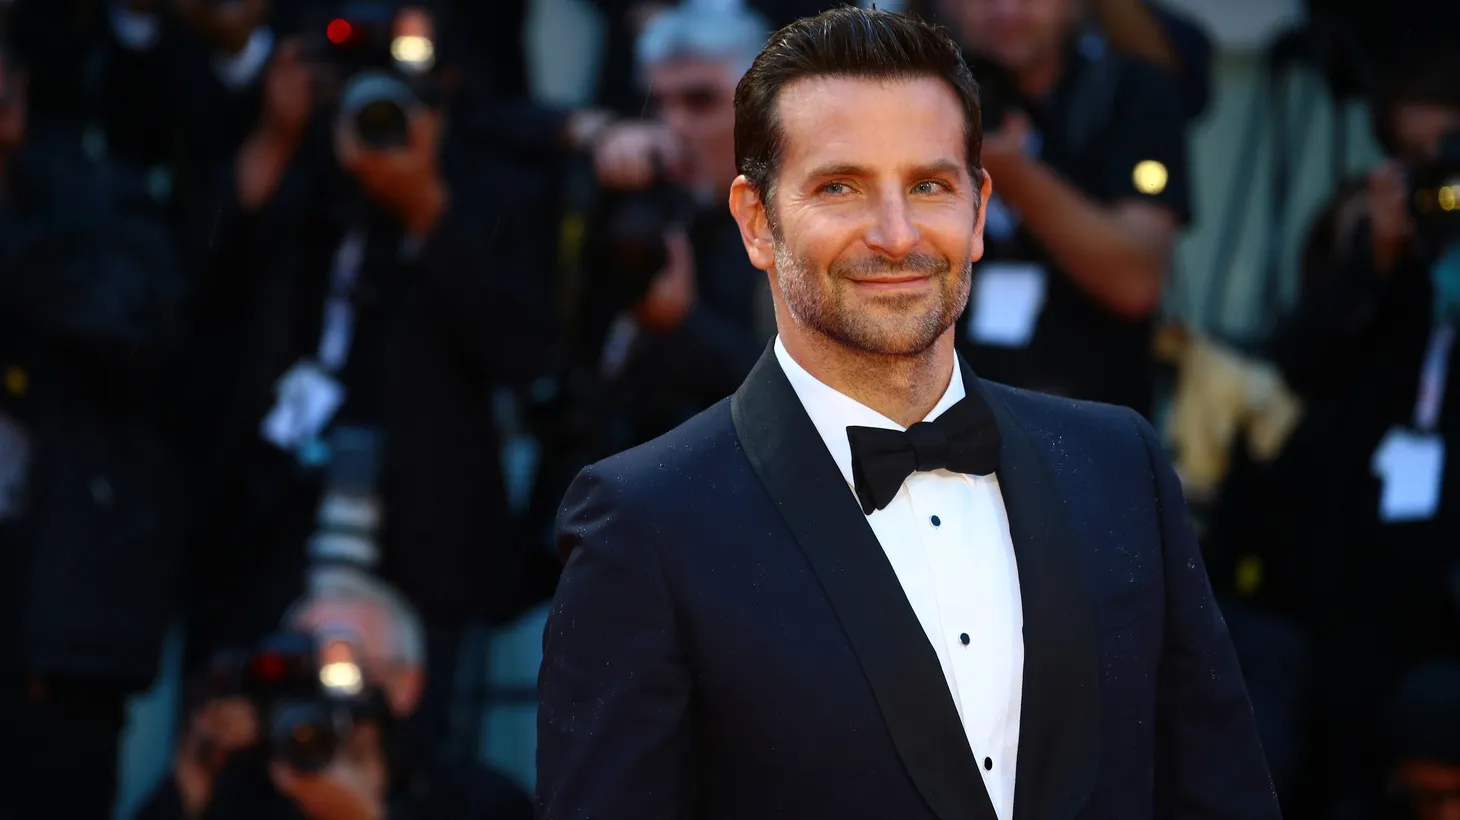 Bradley Cooper walks the red carpet for his movie “A Star Is Born” at the 2018 Venice Film Festival. For that film and others, Cooper passed on an upfront payday and instead took a piece of the profits. Those gambles paid off, but Cooper says “those days are completely gone.”